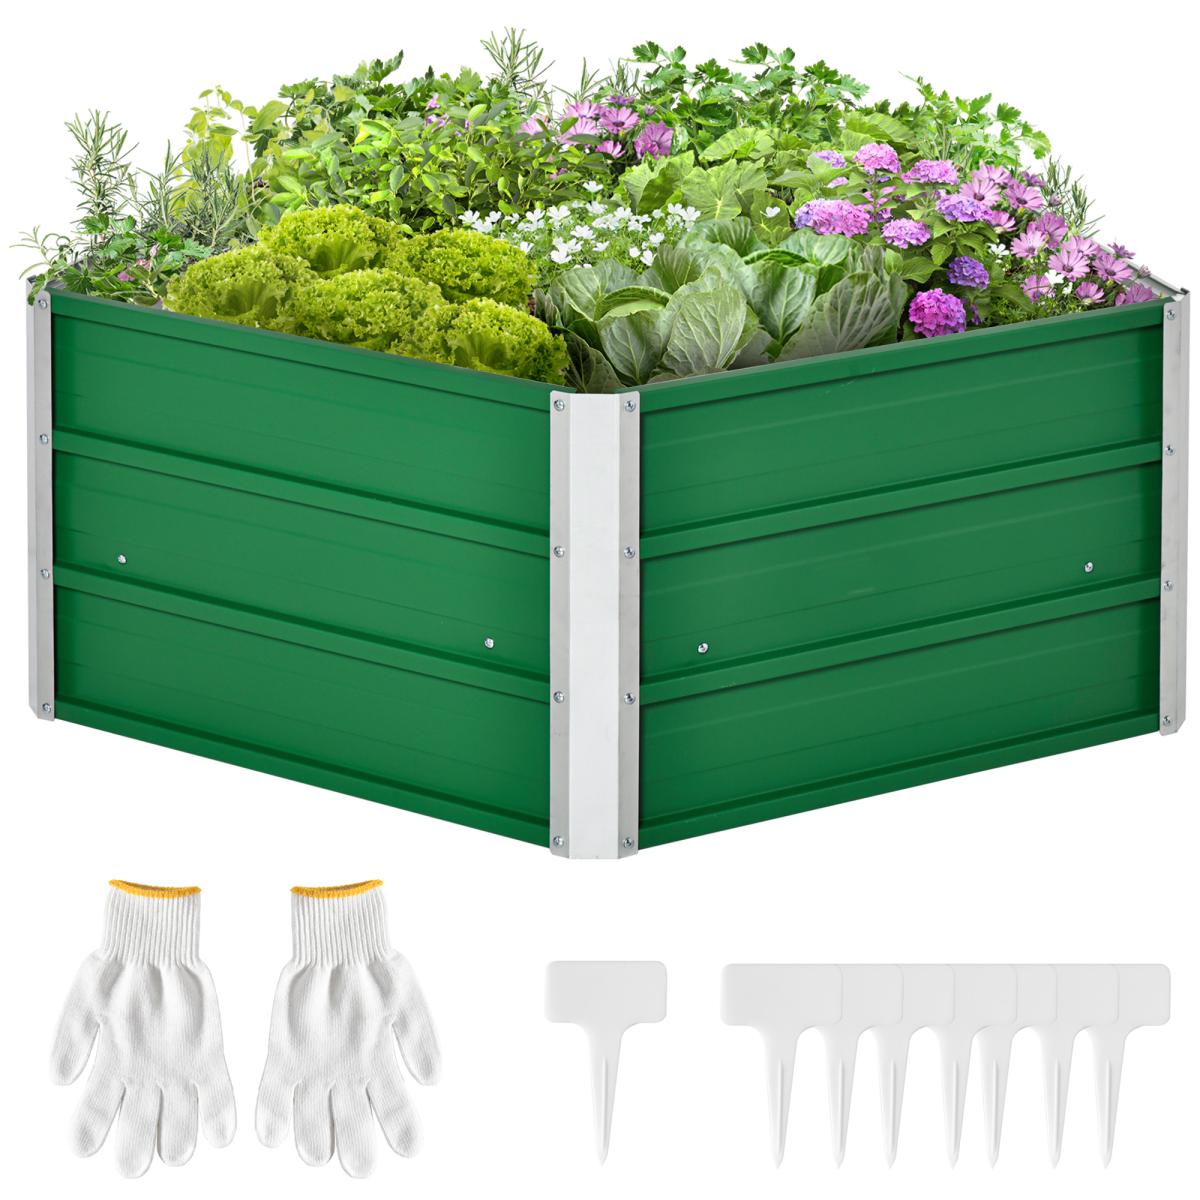 40'' x 16'' Hexagon Metal Raised Garden Bed, Elevated Large Corrugated Galvanized Steel Planter Box w/ Install Gloves for Backyard, Patio to Grow Vegetables, Herbs, and Flowers, Green